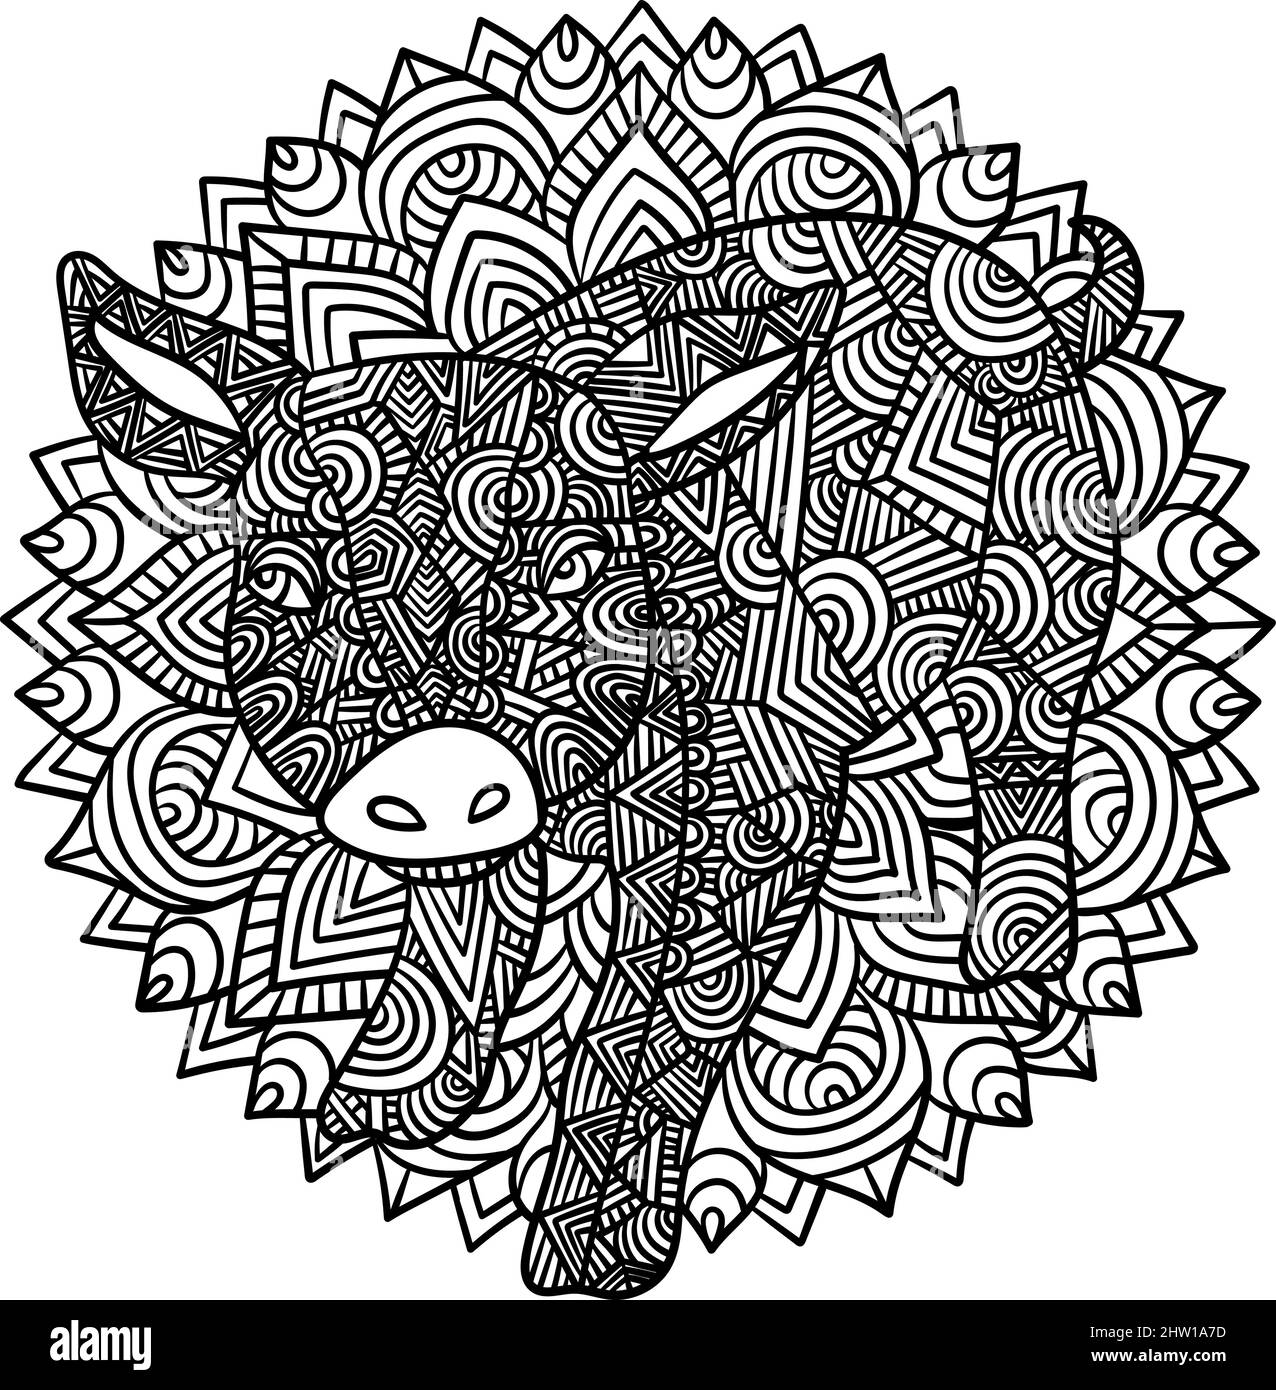 Pig Mandala Coloring Pages for Adults Stock Vector